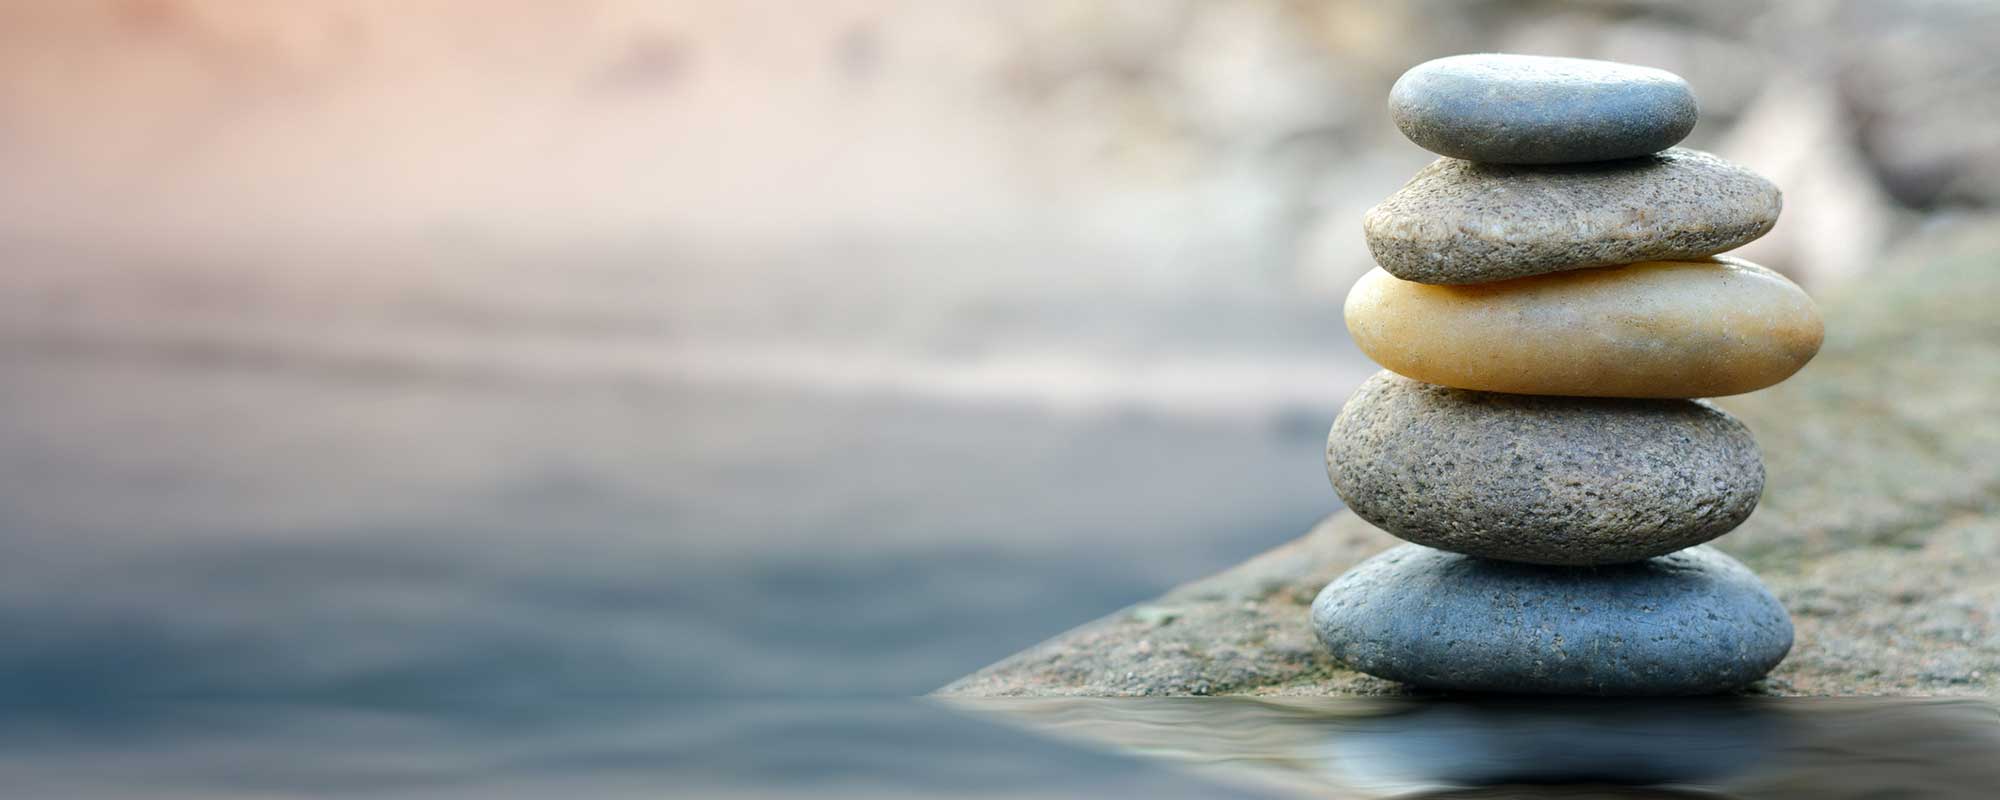 Stones balancing by a river.